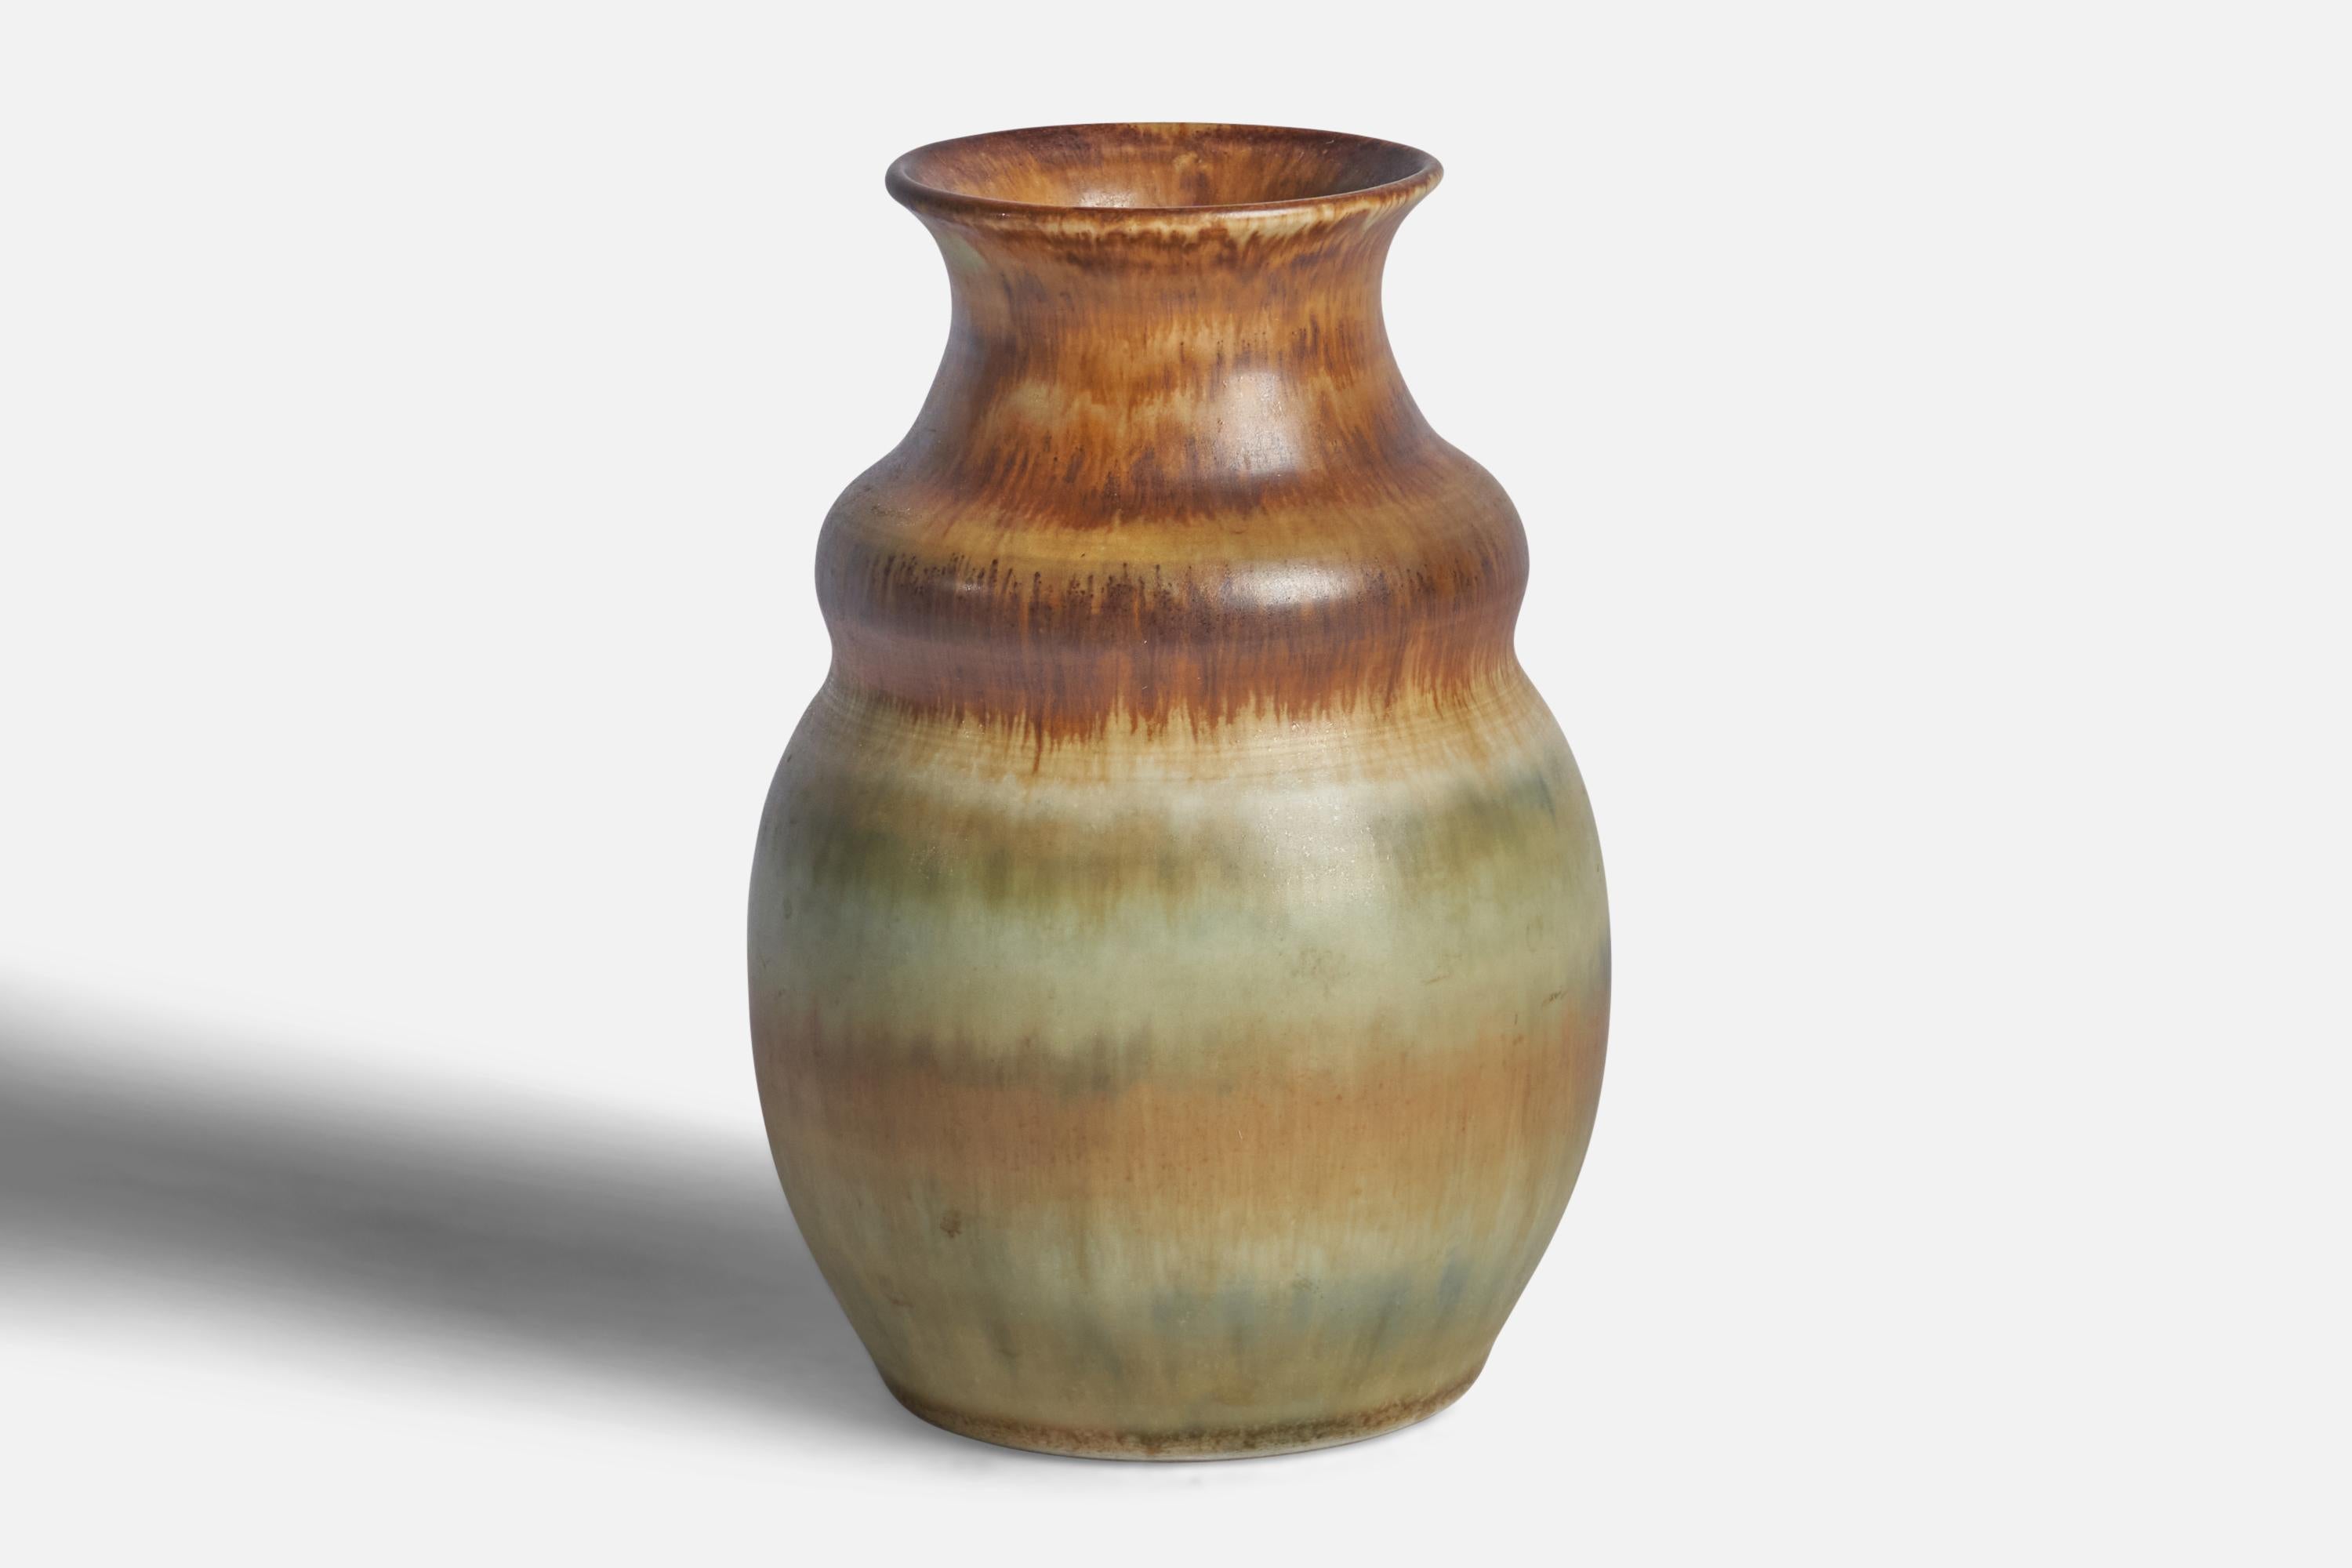 A brown and beige and green-glazed stoneware vase designed by Gunnar Andersson and produced by Höganäs Keramik, Sweden, c. 1970s.